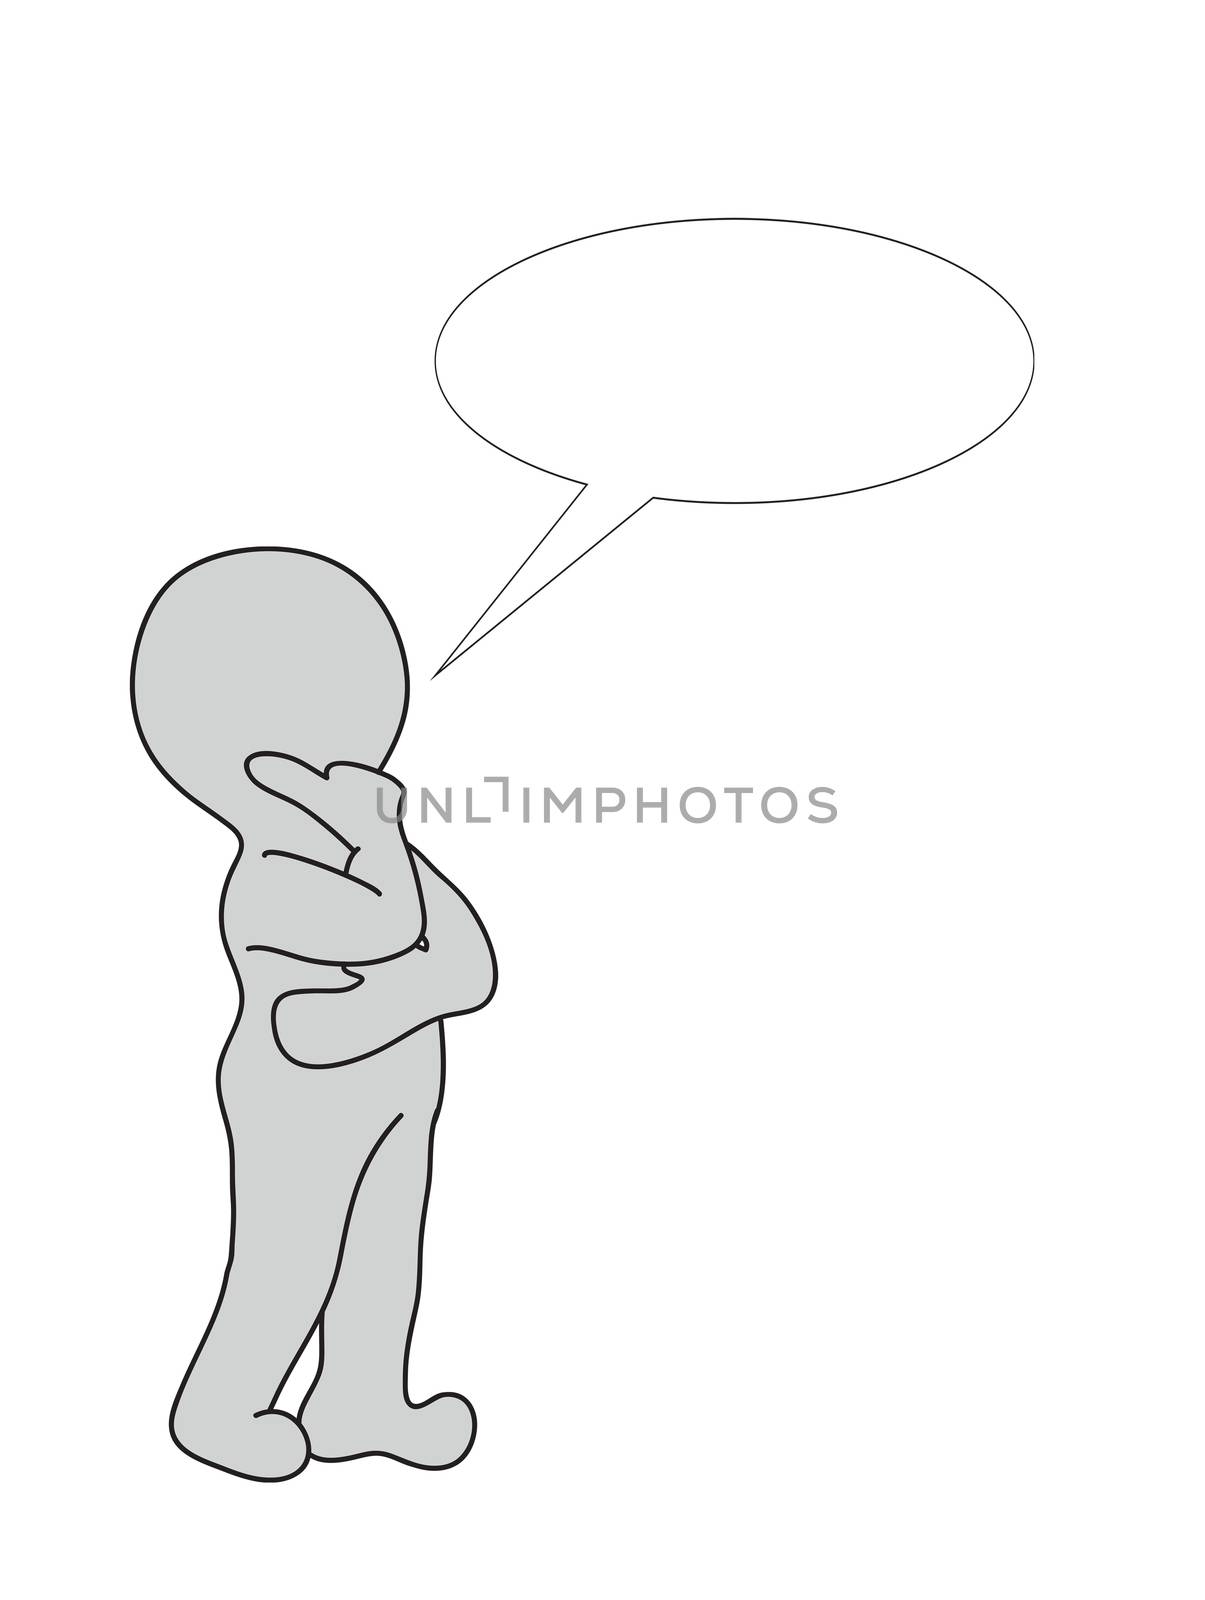 Speech bubble.2D little human character with a Speech bubble. Blank for copy space.